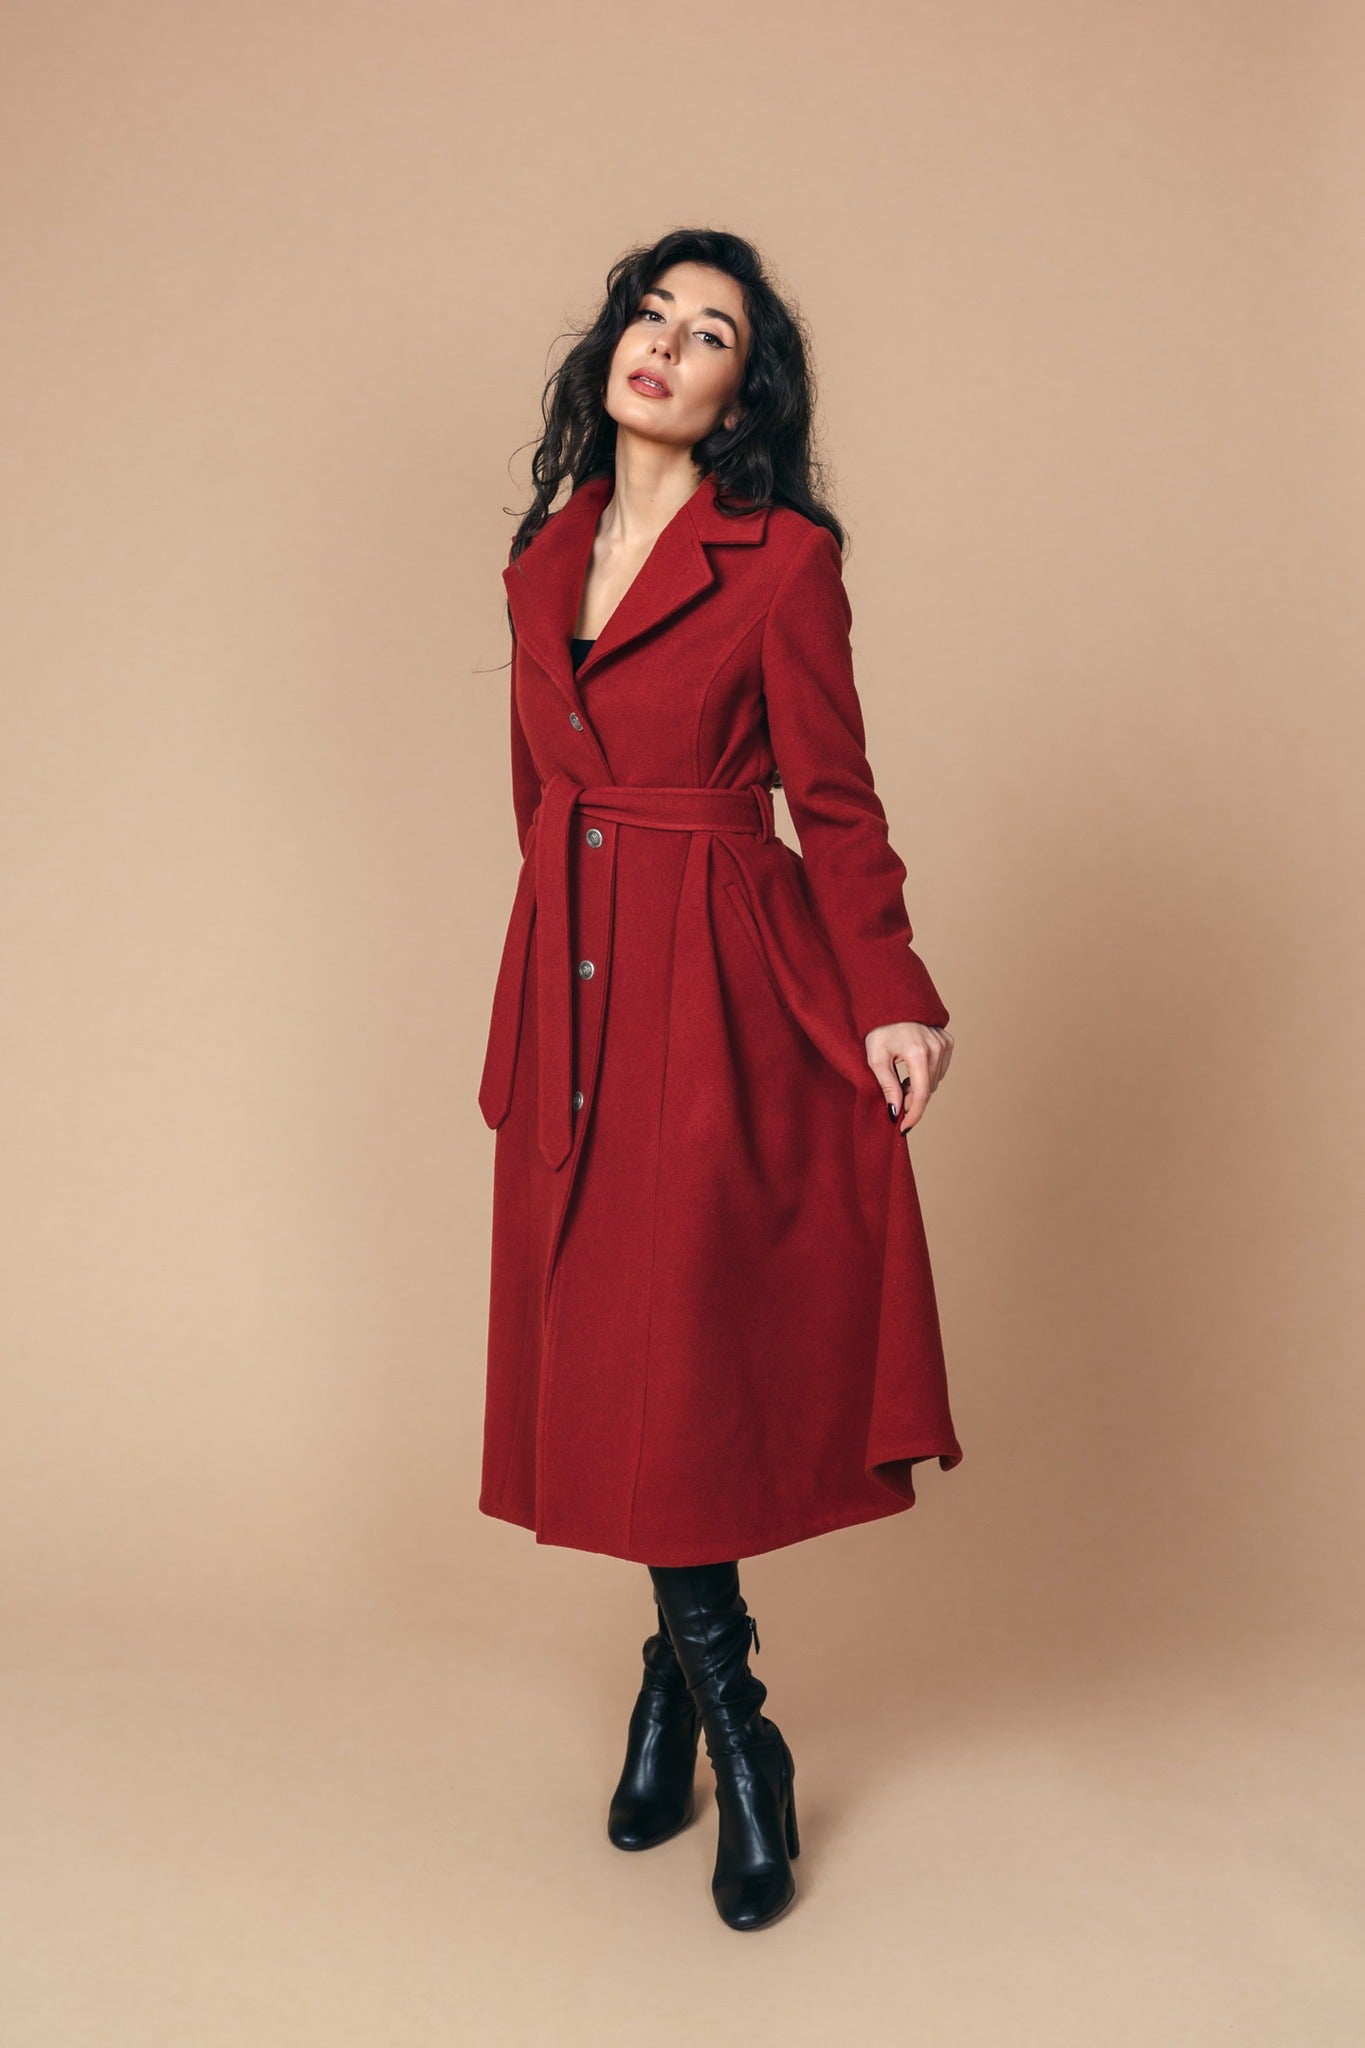 "Sloane" Coat 100% Wool With Lining in Red Brick Colour - front 2